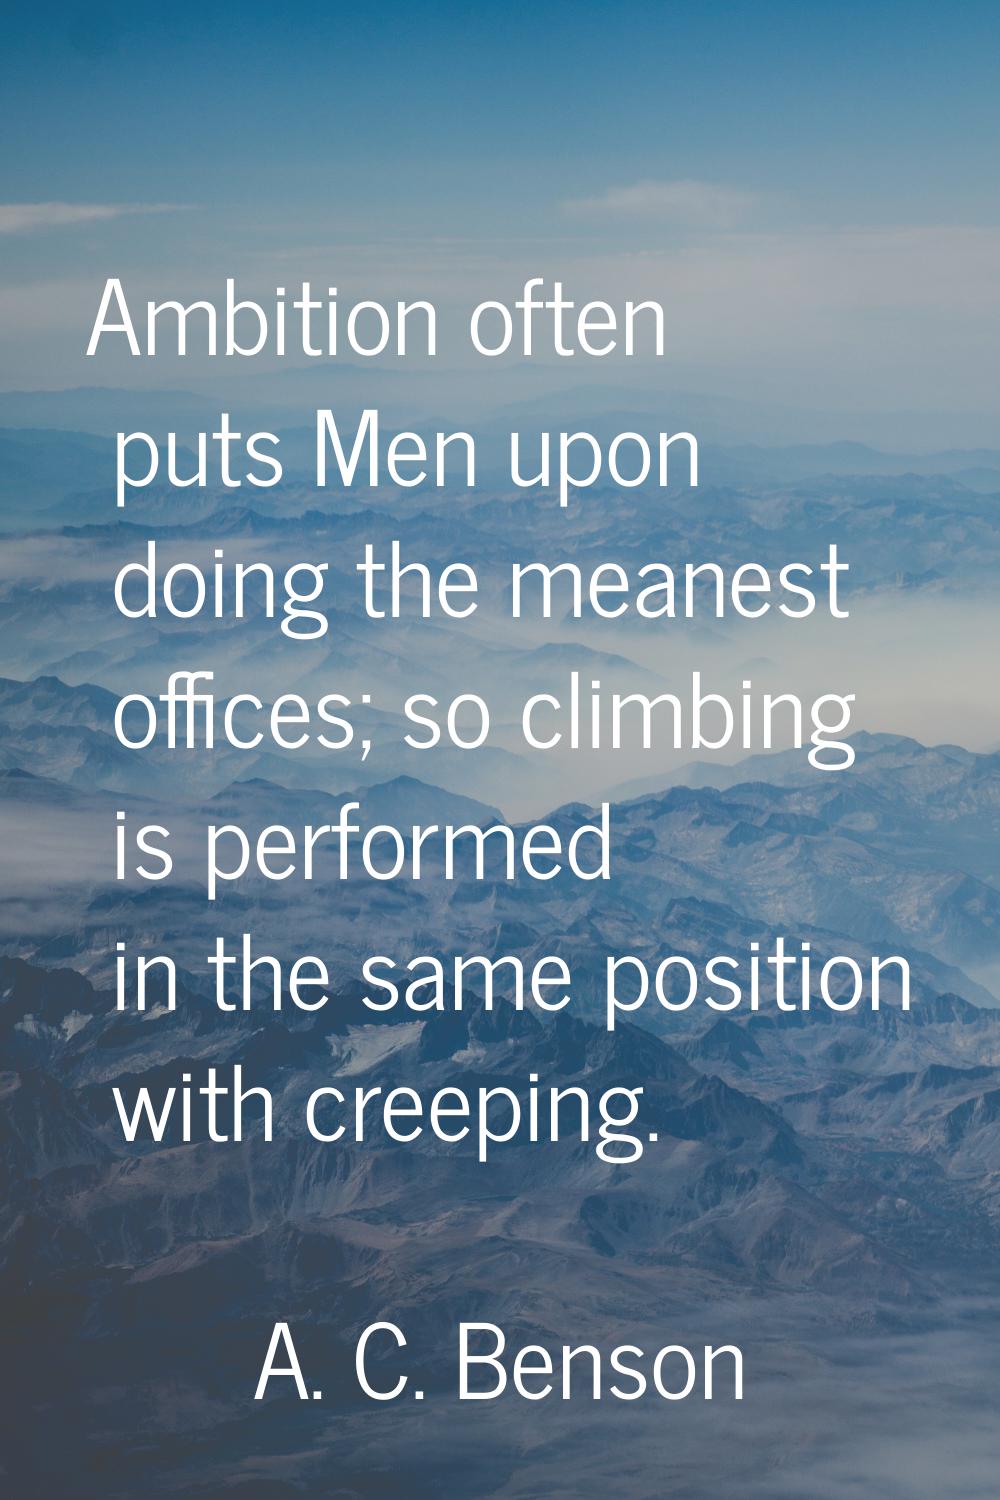 Ambition often puts Men upon doing the meanest offices; so climbing is performed in the same positi